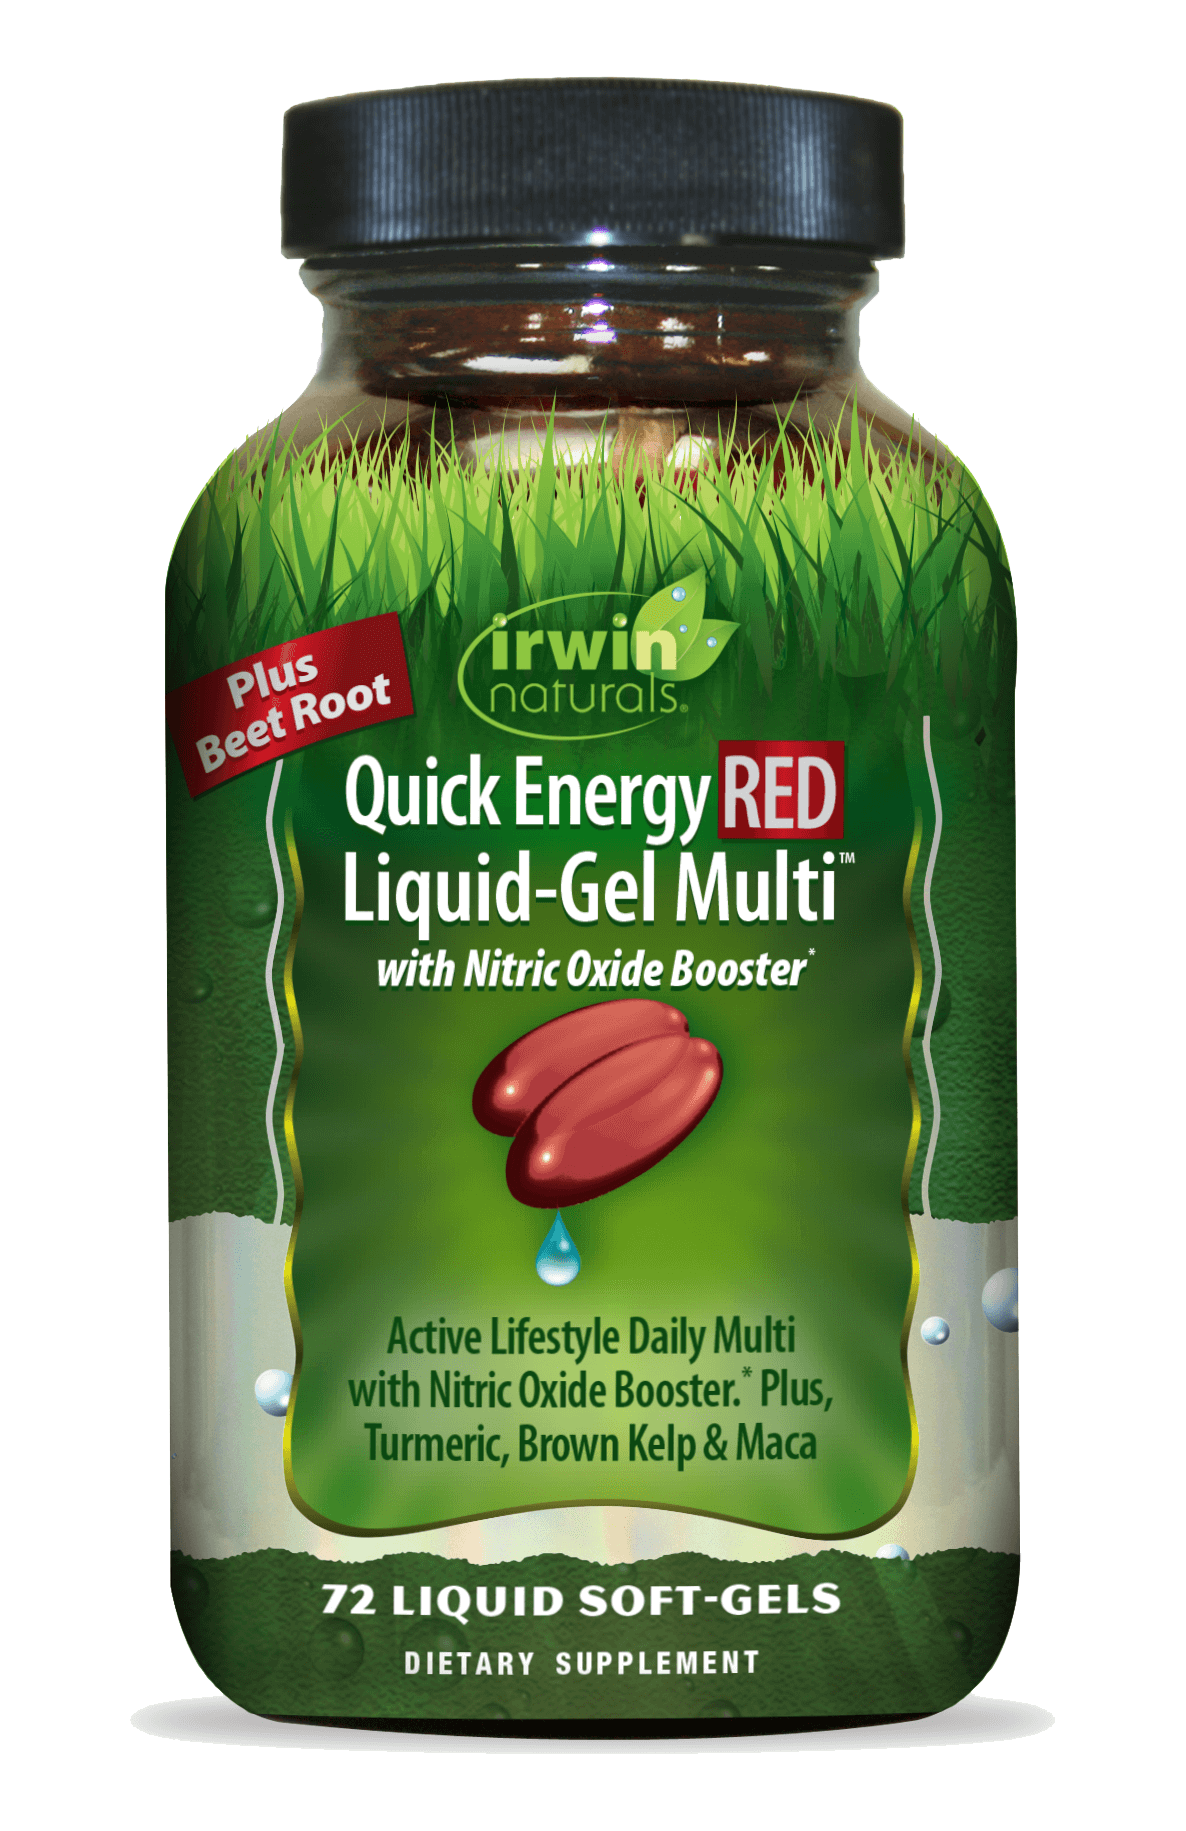 Quick Energy RED liquid gel multi with Nitric Oxide Booster by Irwin Naturals